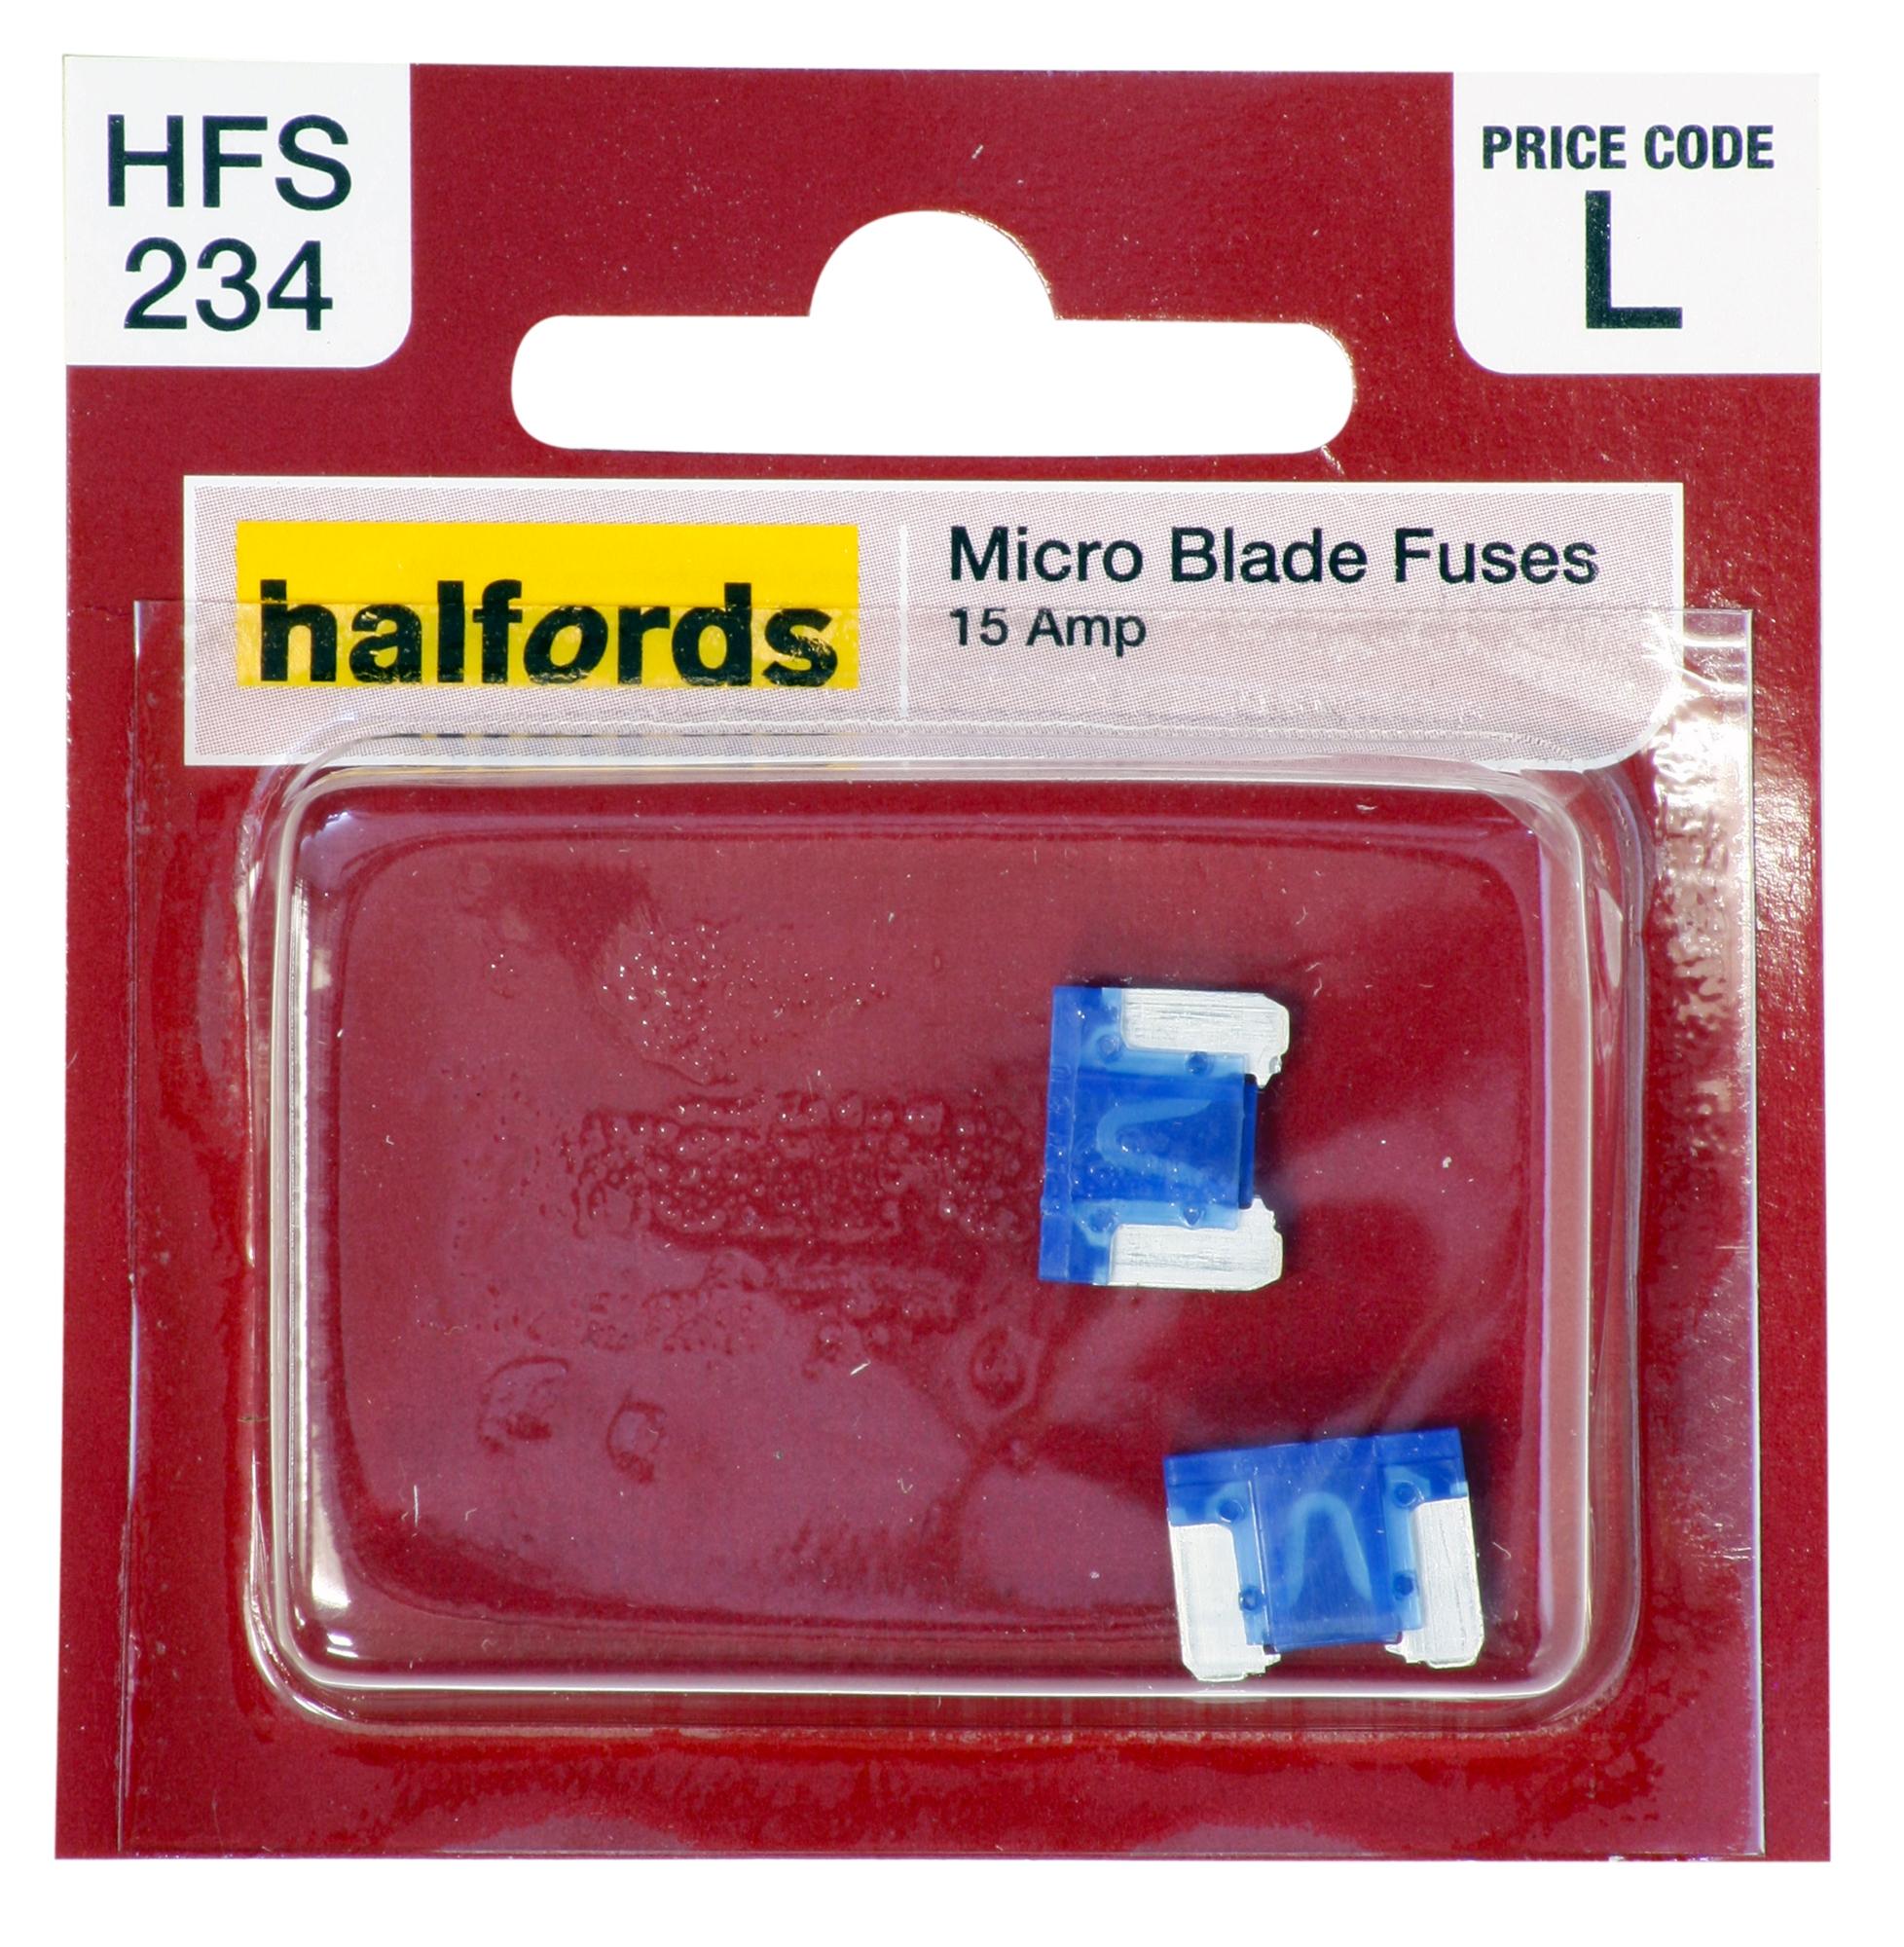 Halfords Micro Blade Fuses 15 Amp (Hfs234)